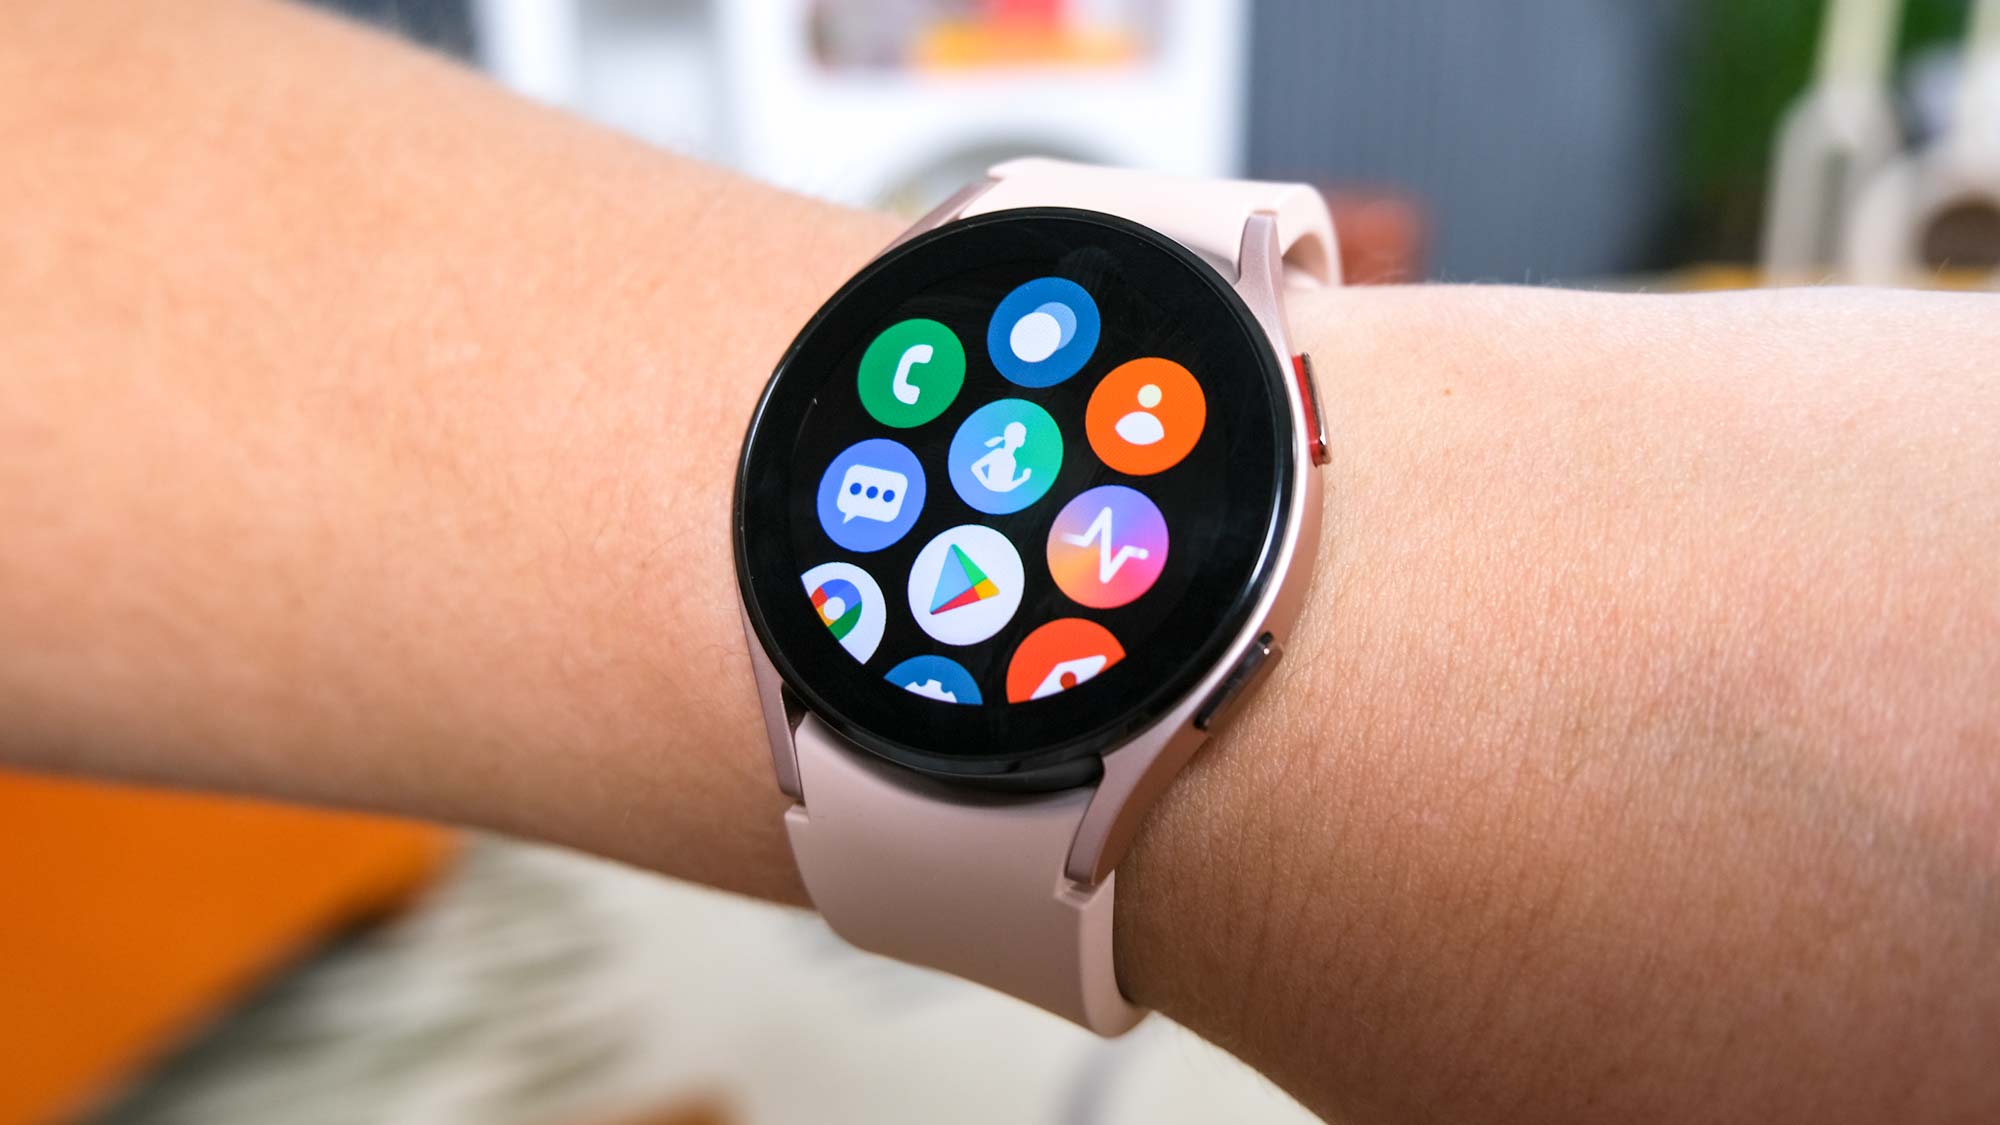 Samsung Galaxy Watch 4: Redefining Wearable Technology